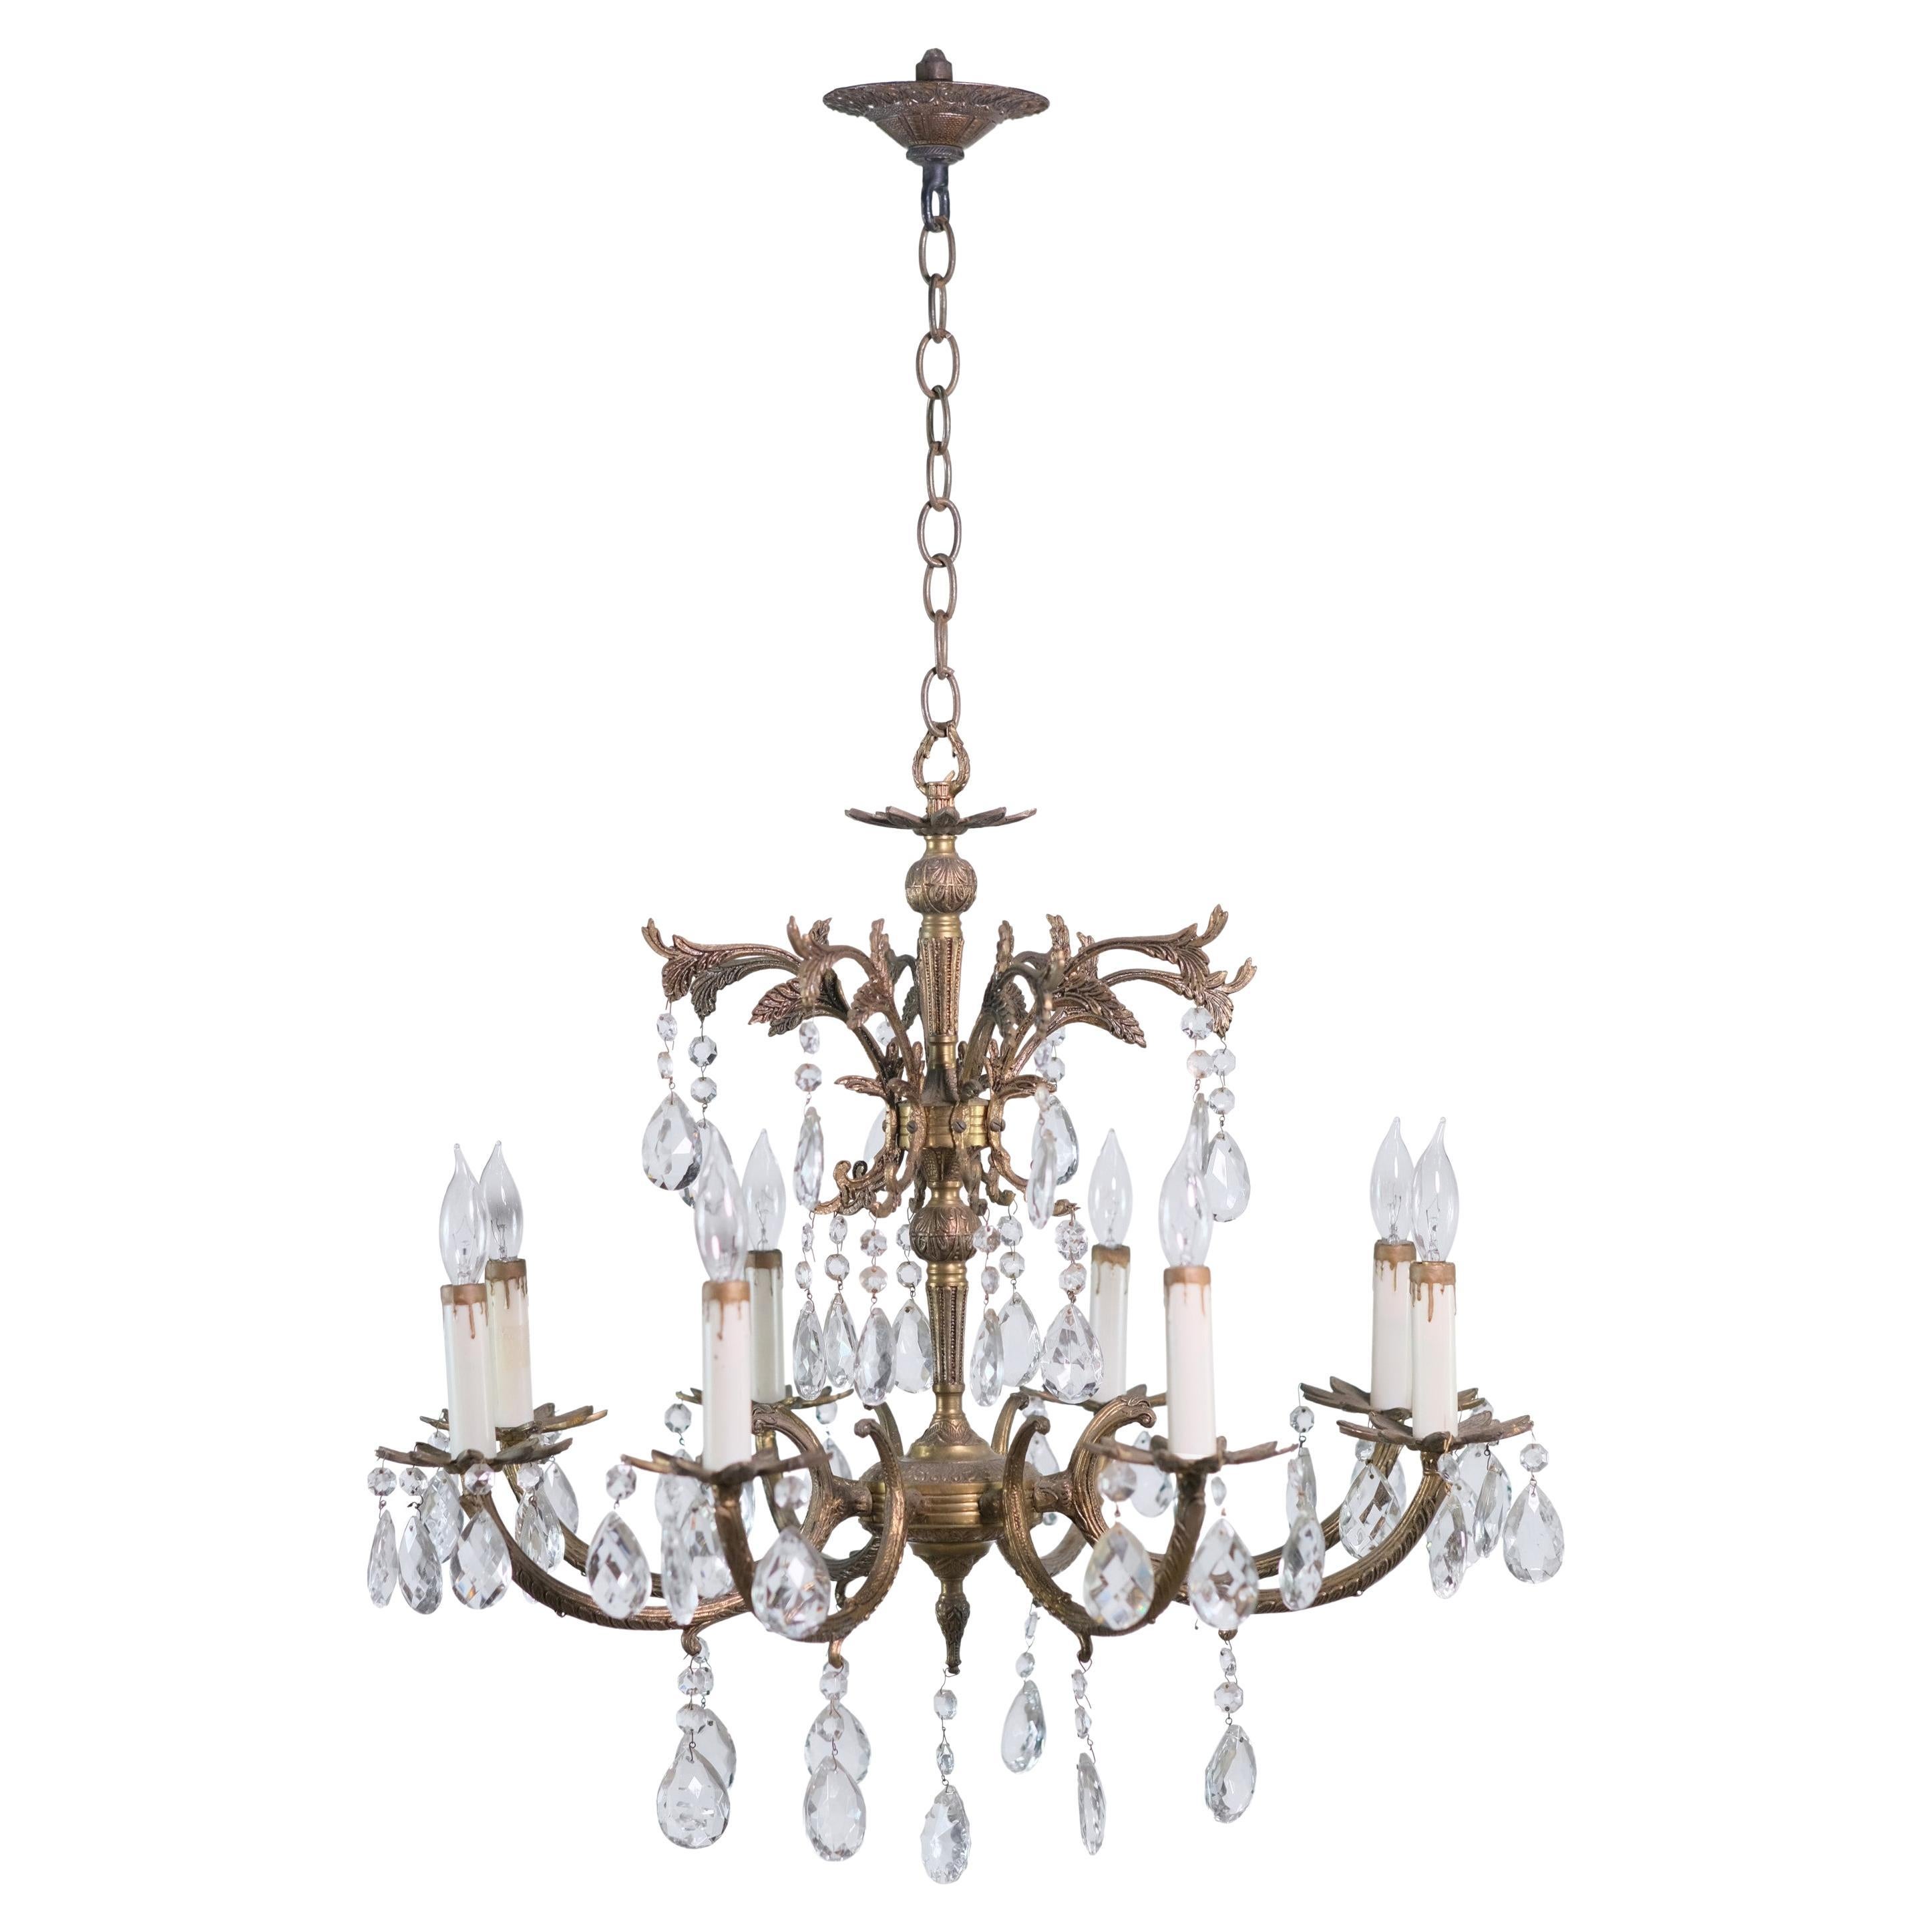 Restored 8 Arm Bronze Small Chandelier Dripping Crystals For Sale